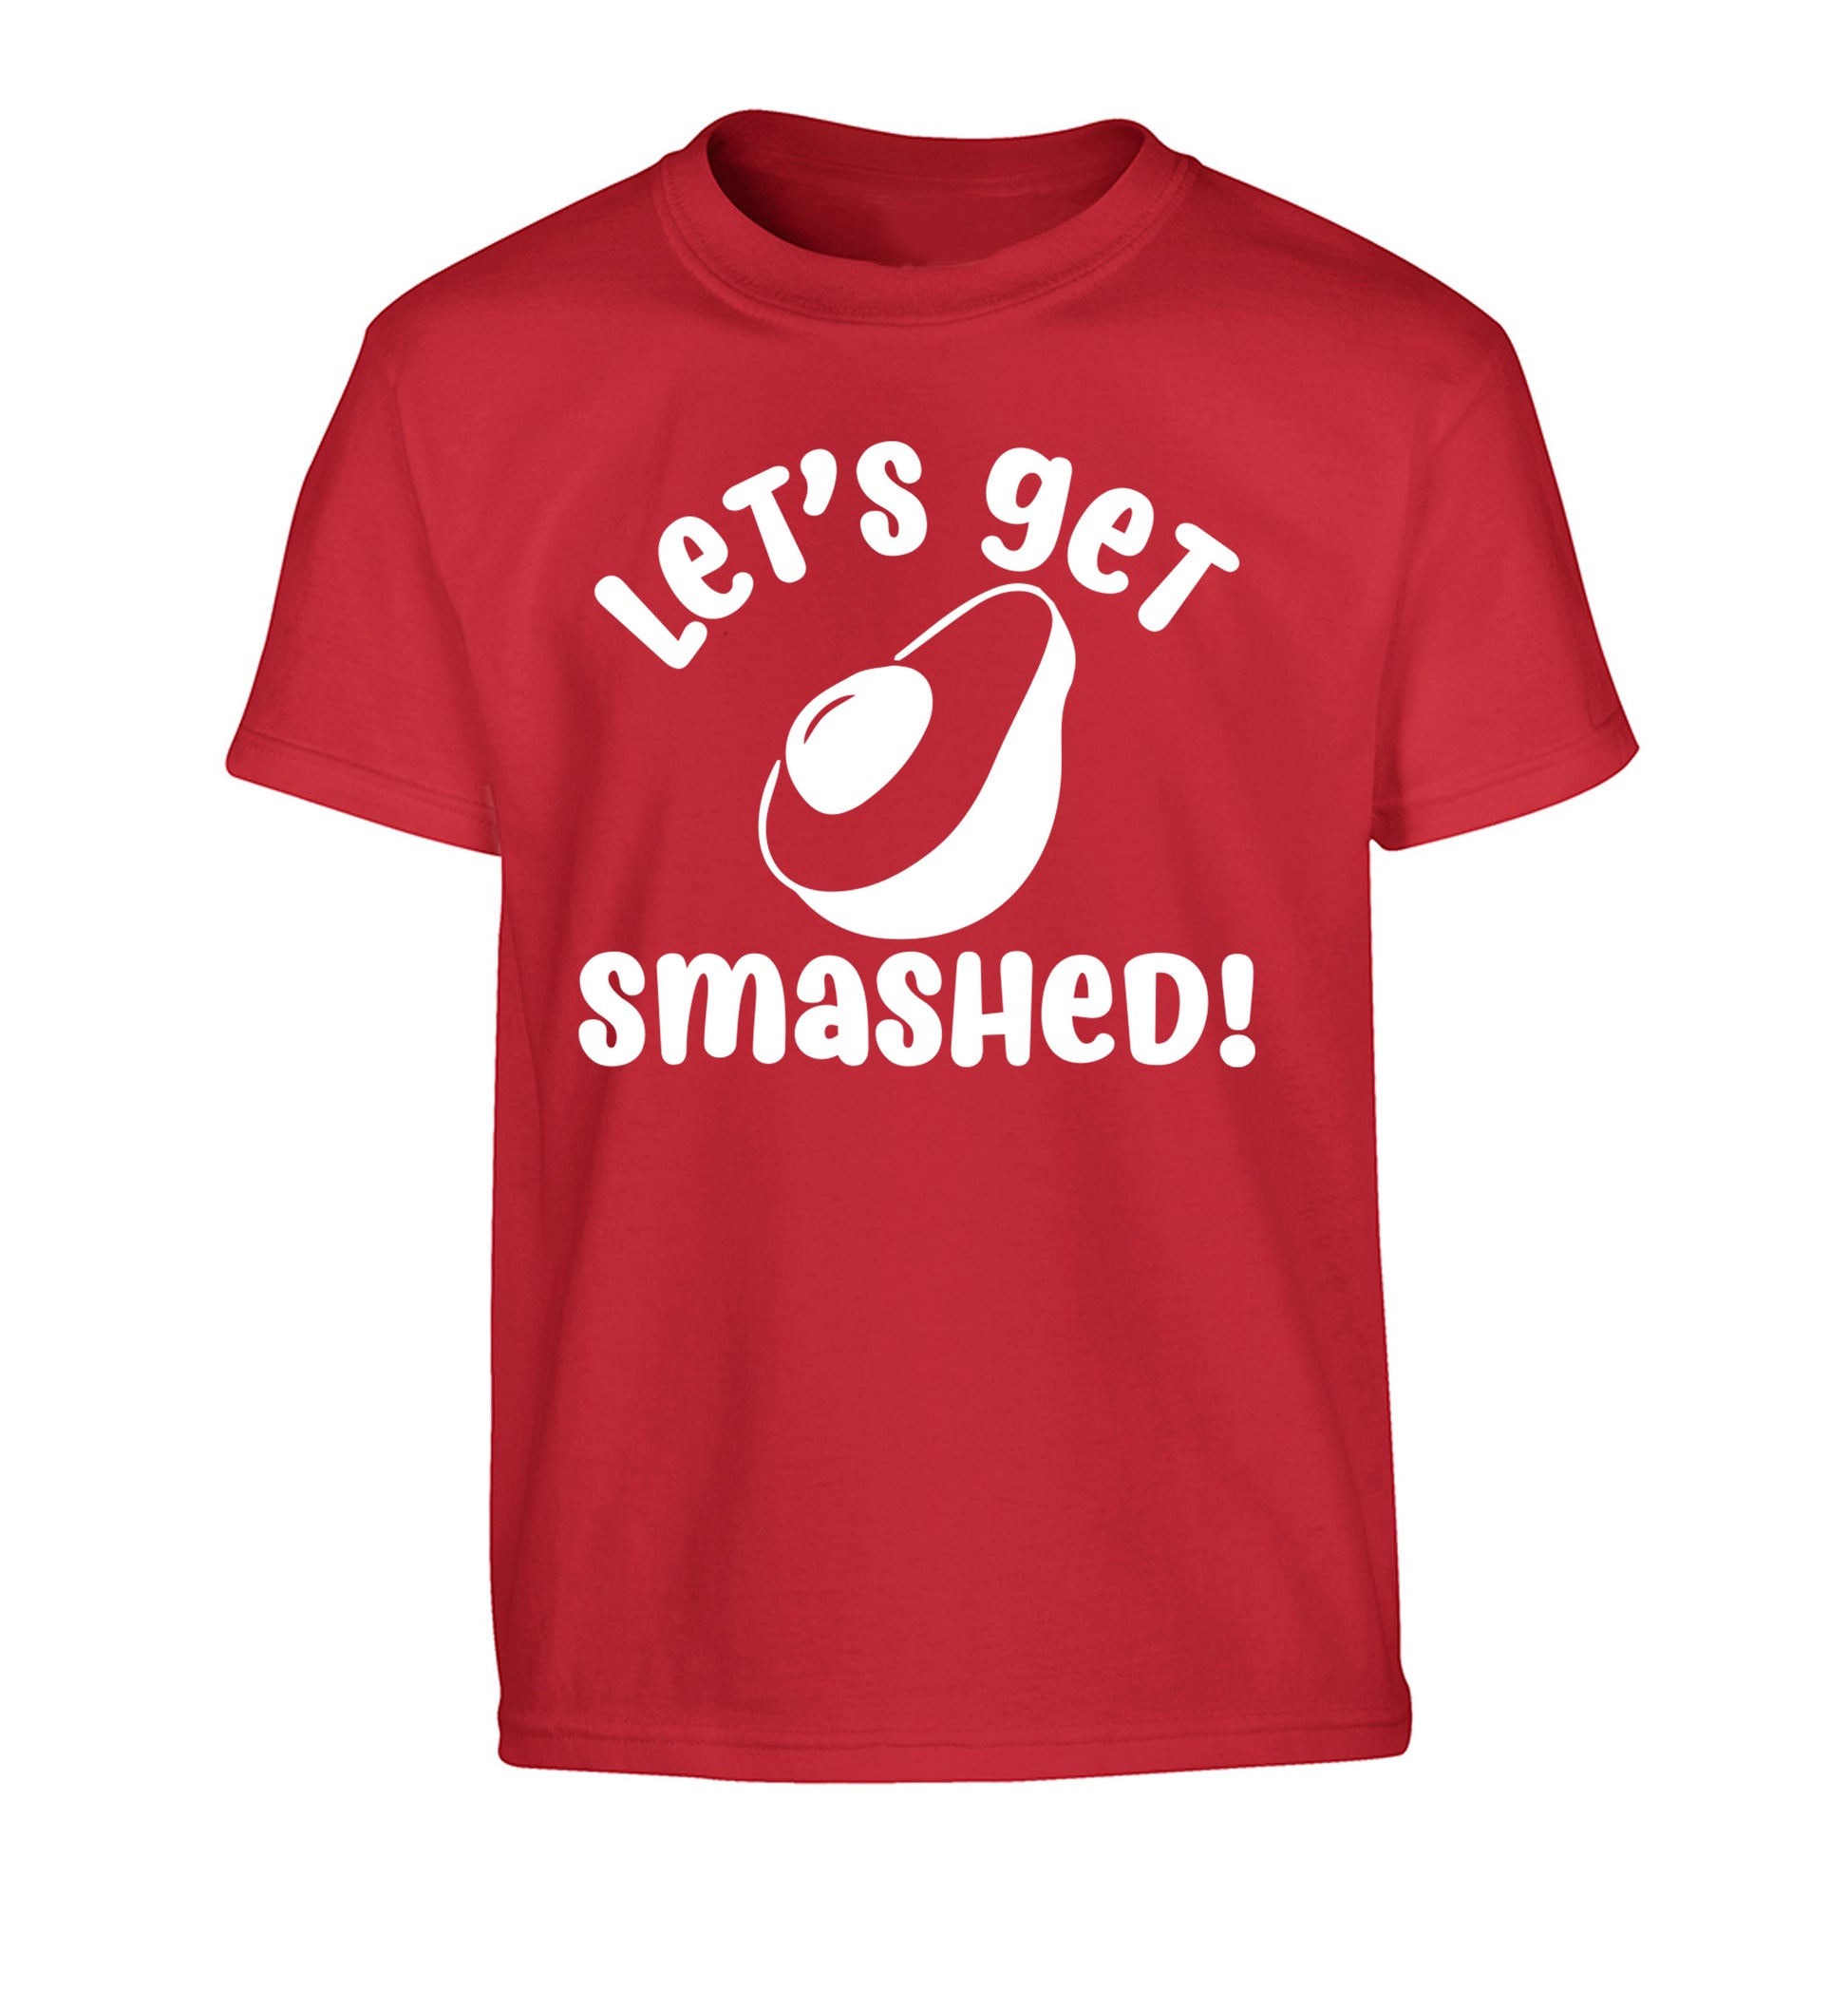 Let's get smashed Children's red Tshirt 12-14 Years